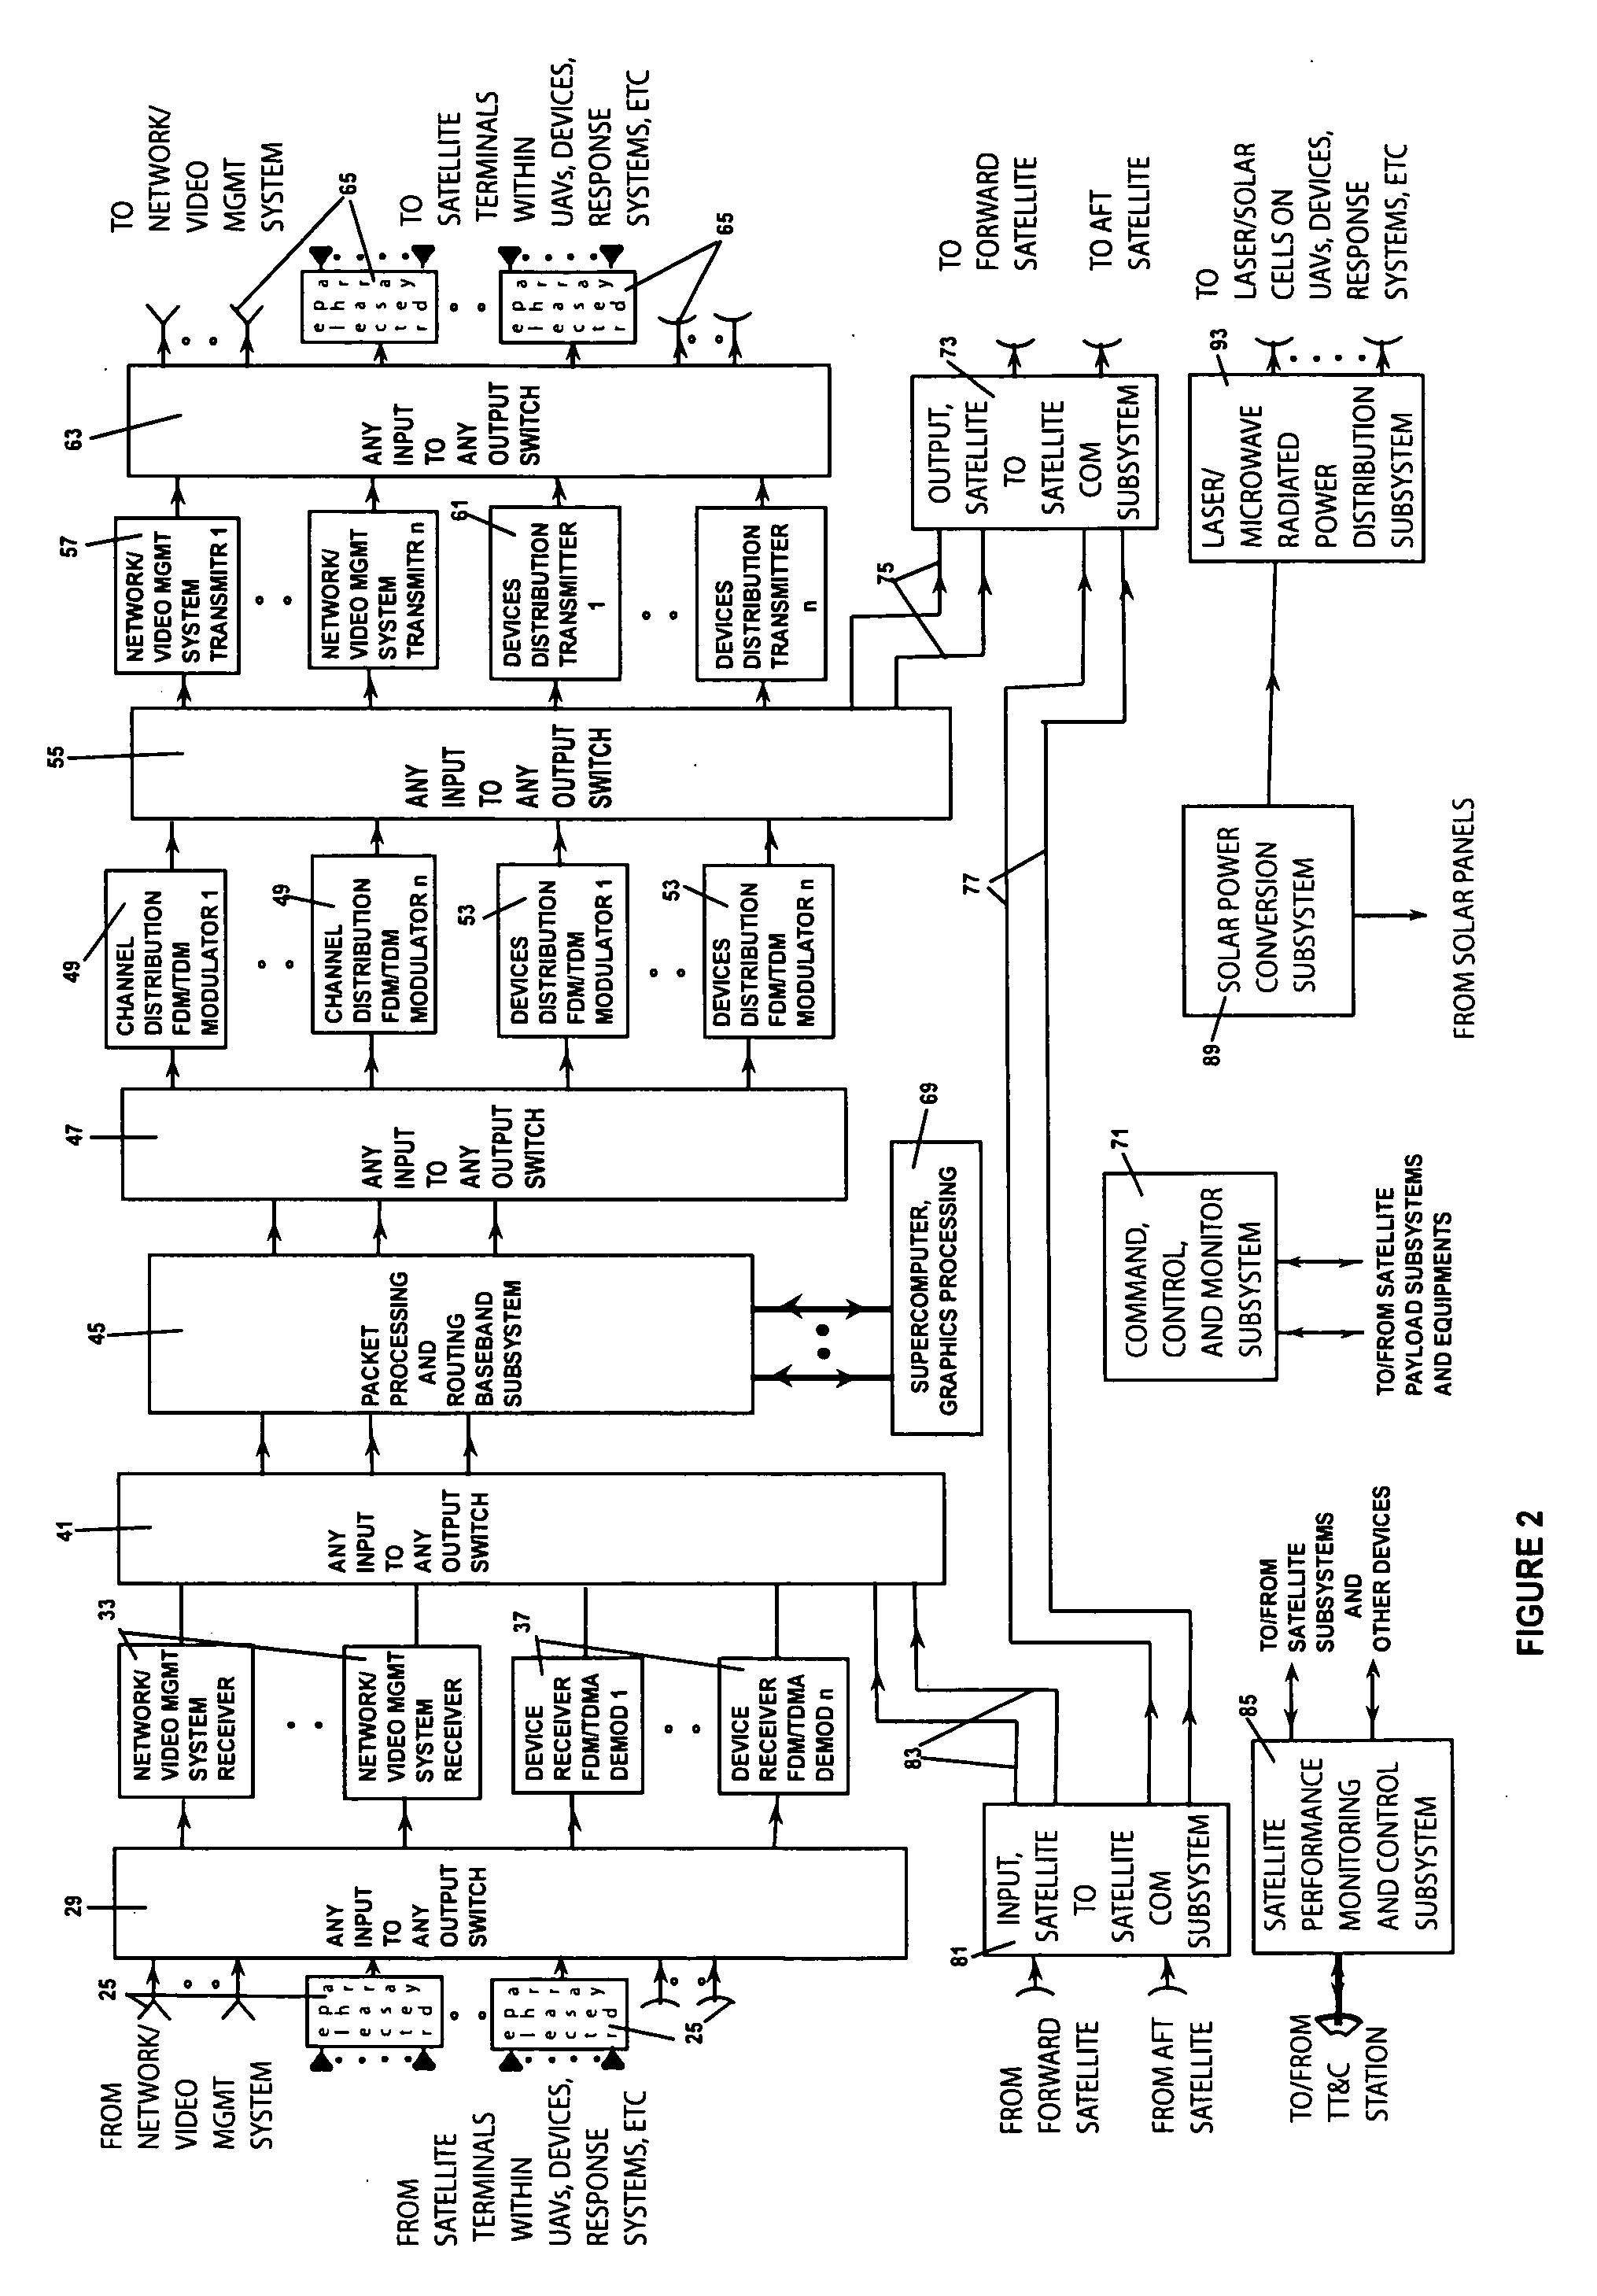 System and Method for Satellite Enhanced Command, Control, and Surveillance Services Between Network Management Centers and Unmanned Land and Aerial Devices